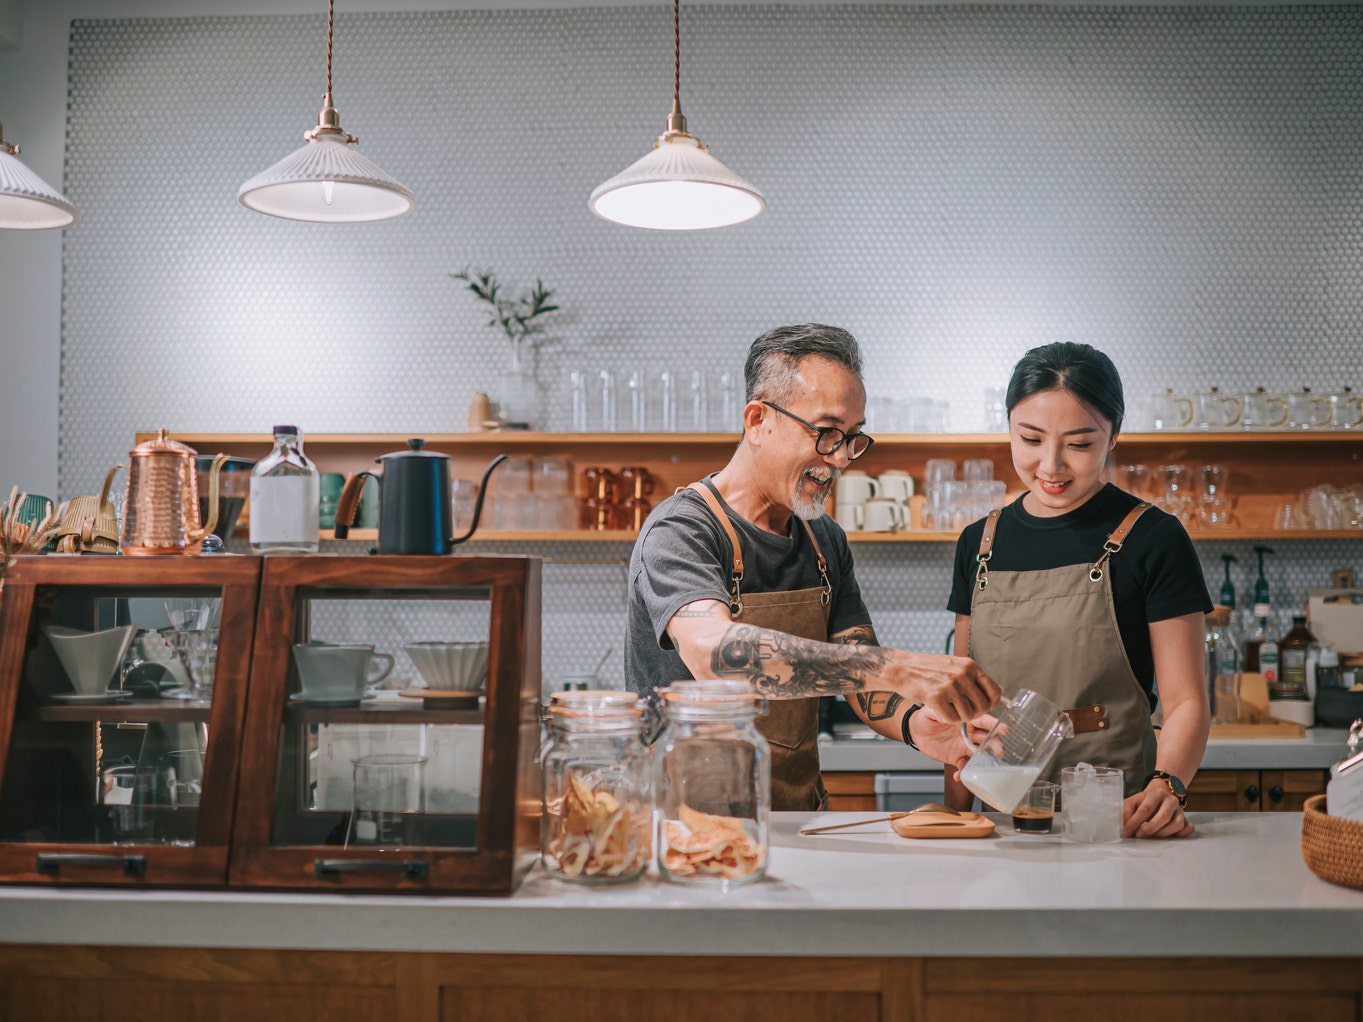 Reborn Coffee Announces Grand Opening of Flagship Store in